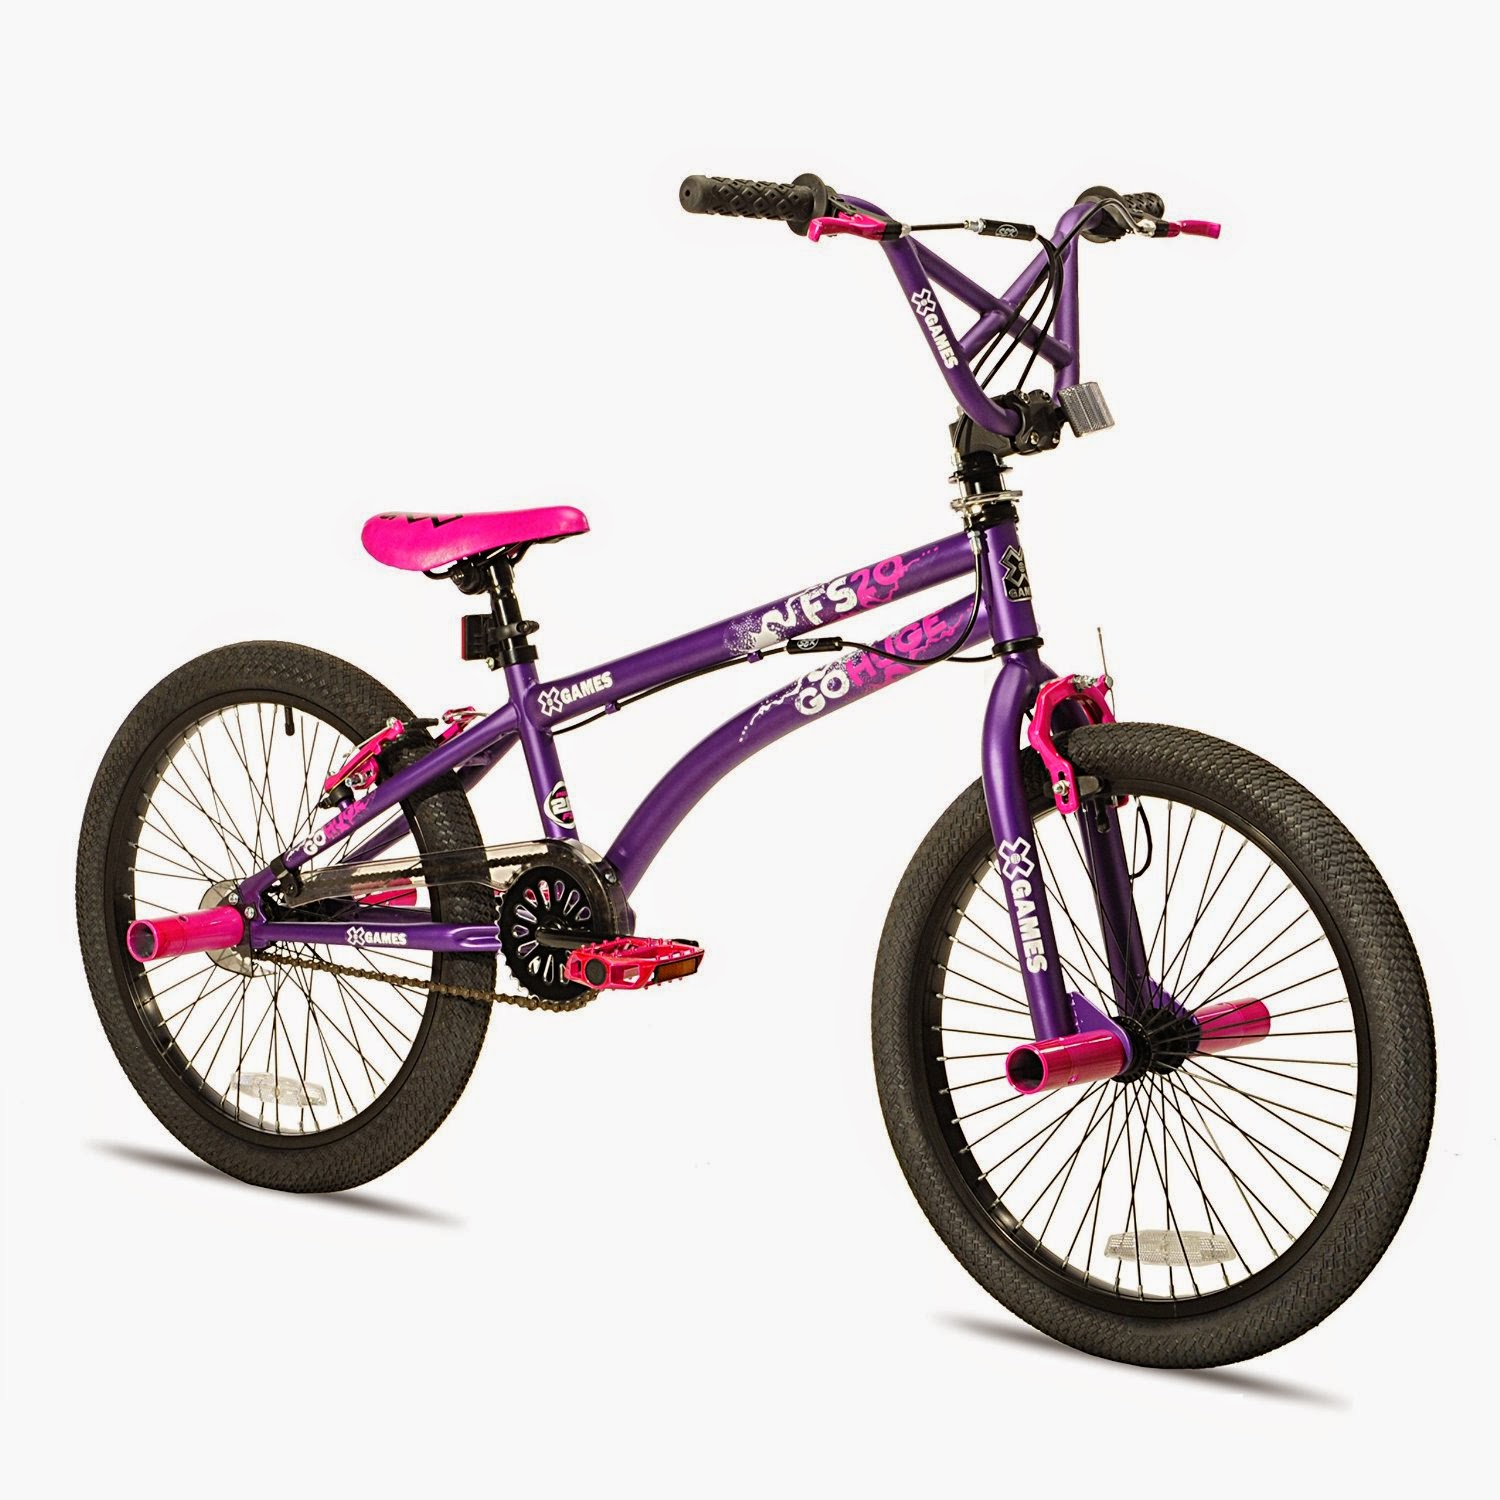 X-Games FS20 BMX Freestyle bike in a choice of colors, black/red or purple/pink